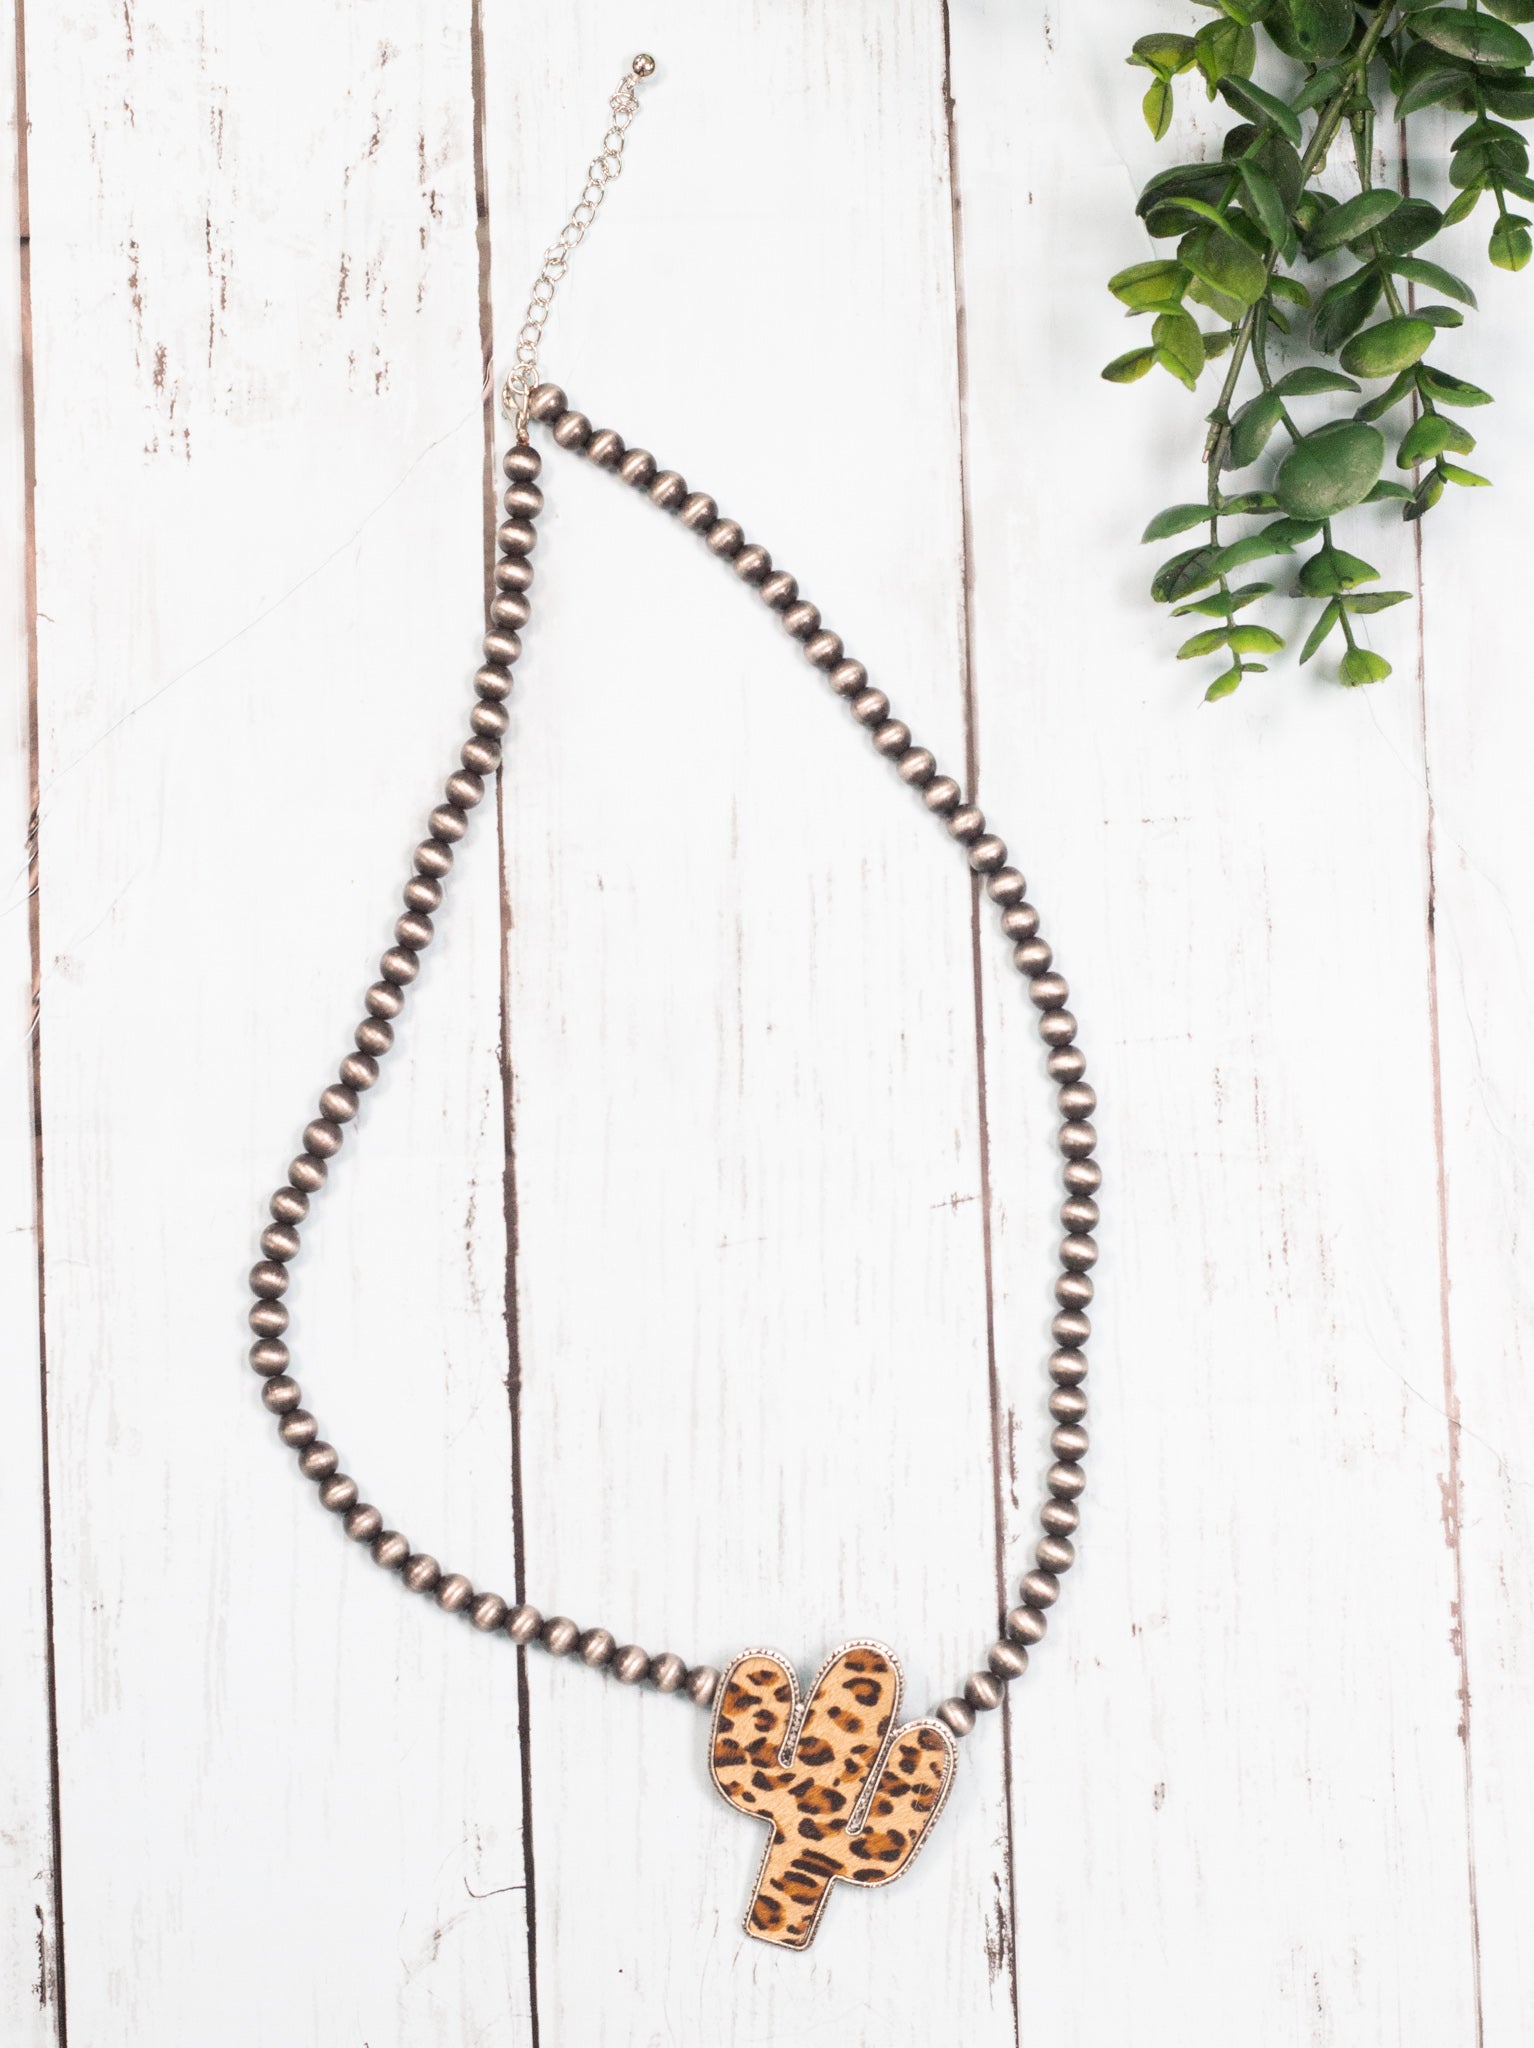 WANTED AND WILD LEOPARD CACTUS PENDANT ON NAVAJO PEARLS NECKLACE